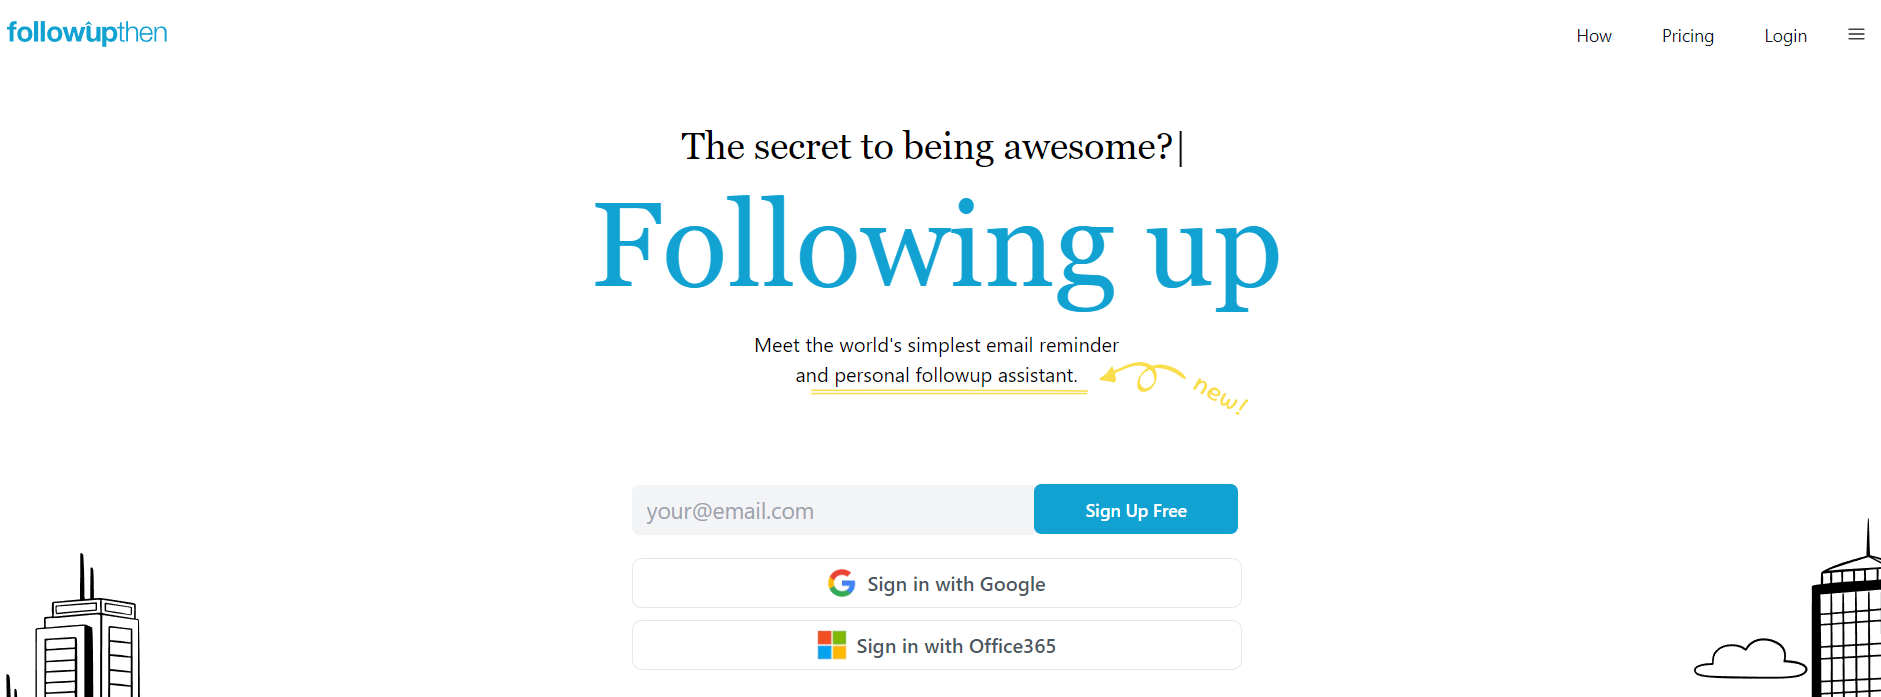 FollowUpThen for email marketing